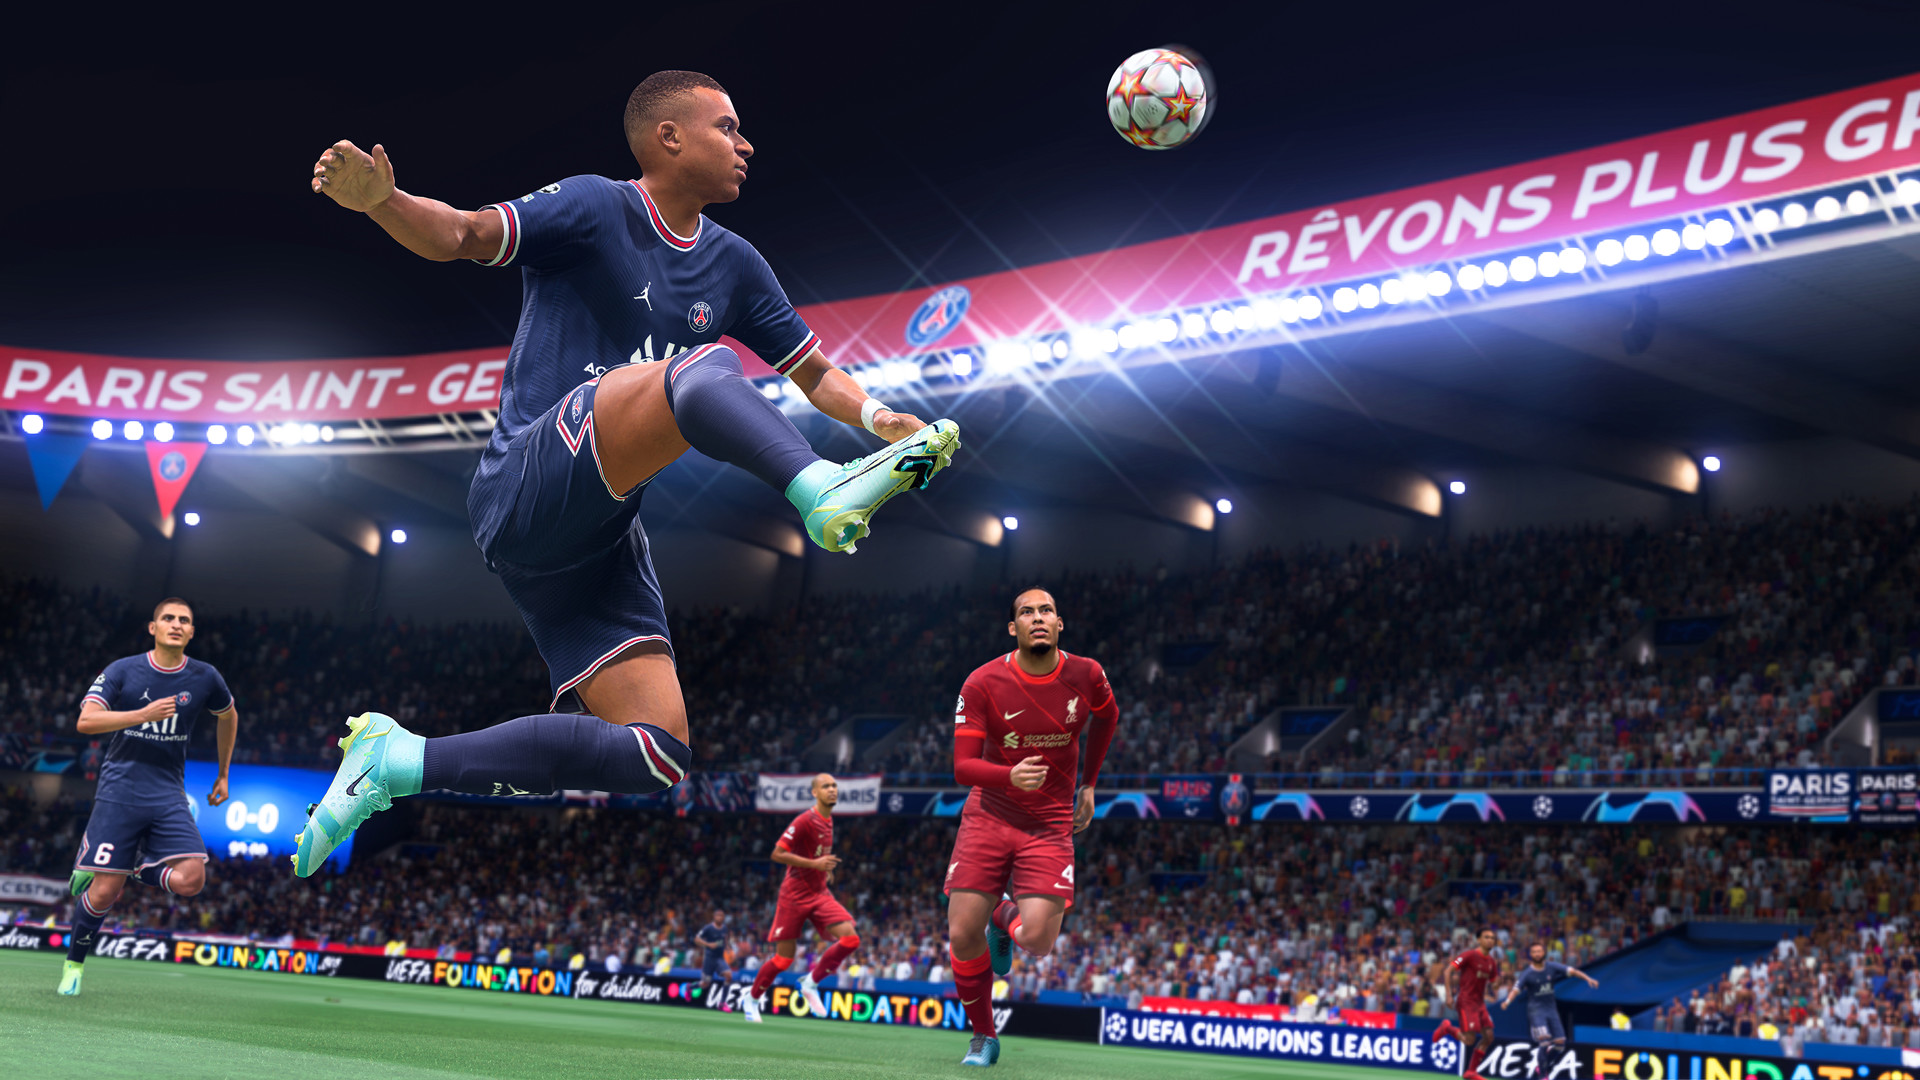 Is FIFA 22 cross platform for PS4 and PS5?